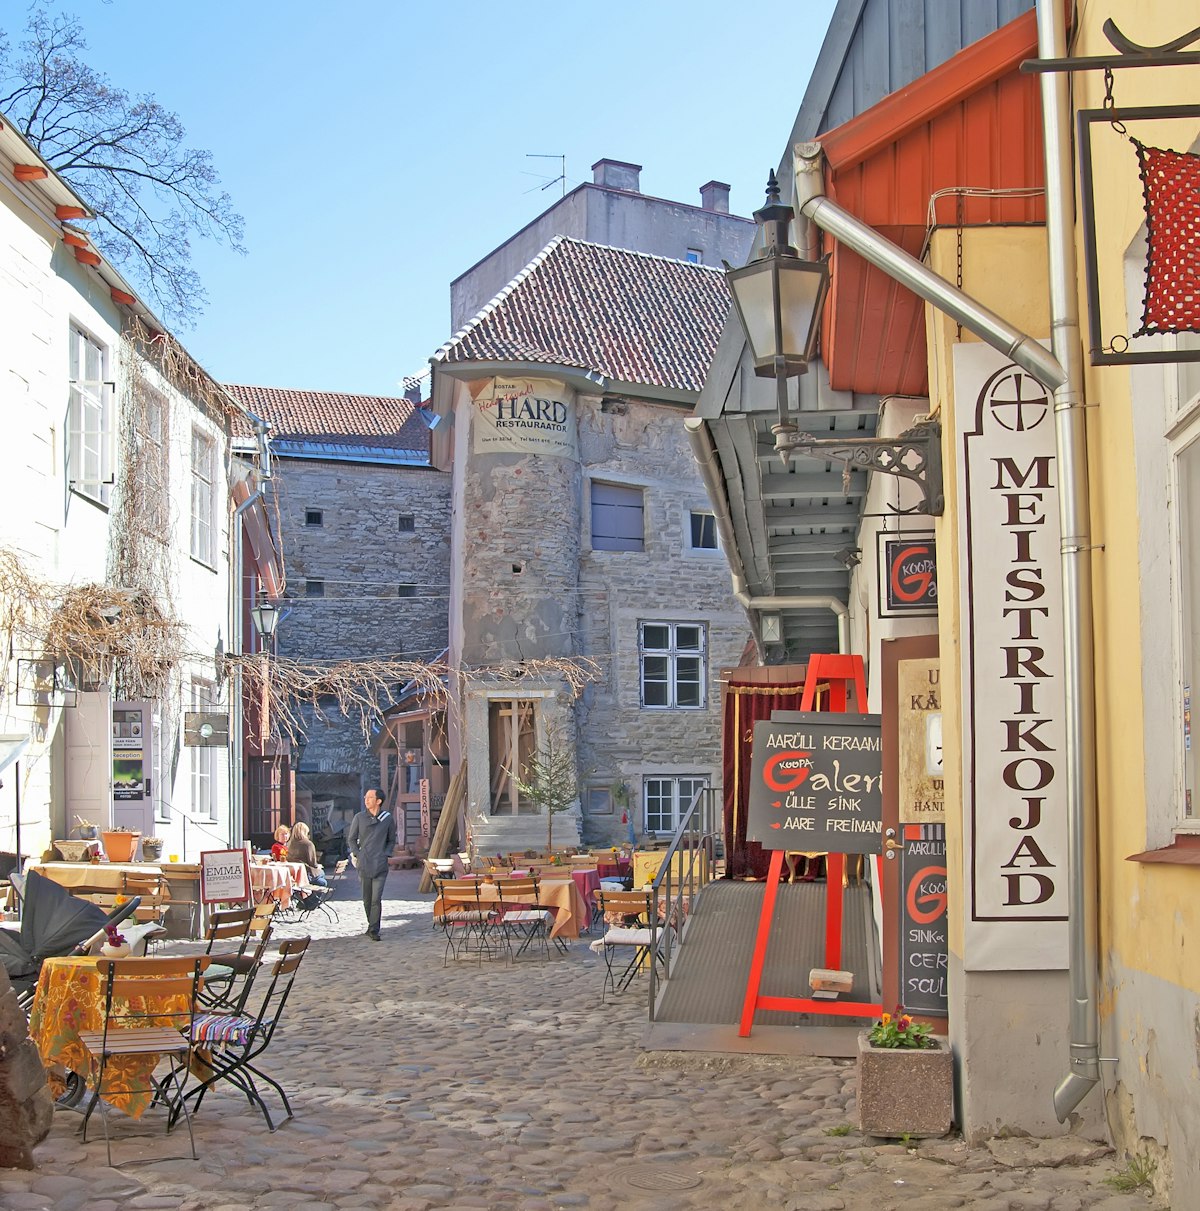 TALLINN, ESTONIA - MAY 1, 2011: Courtyard with cafes and souvenir shops in Old Town. Old Town is historical center of the city and a  part of the UNESCO World Heritage site; Shutterstock ID 246197989; Your name (First / Last): Lauren Gillmore; GL account no.: 56530; Netsuite department name: Online-Design; Full Product or Project name including edition: 65050/ Online Design /LaurenGillmore/POI